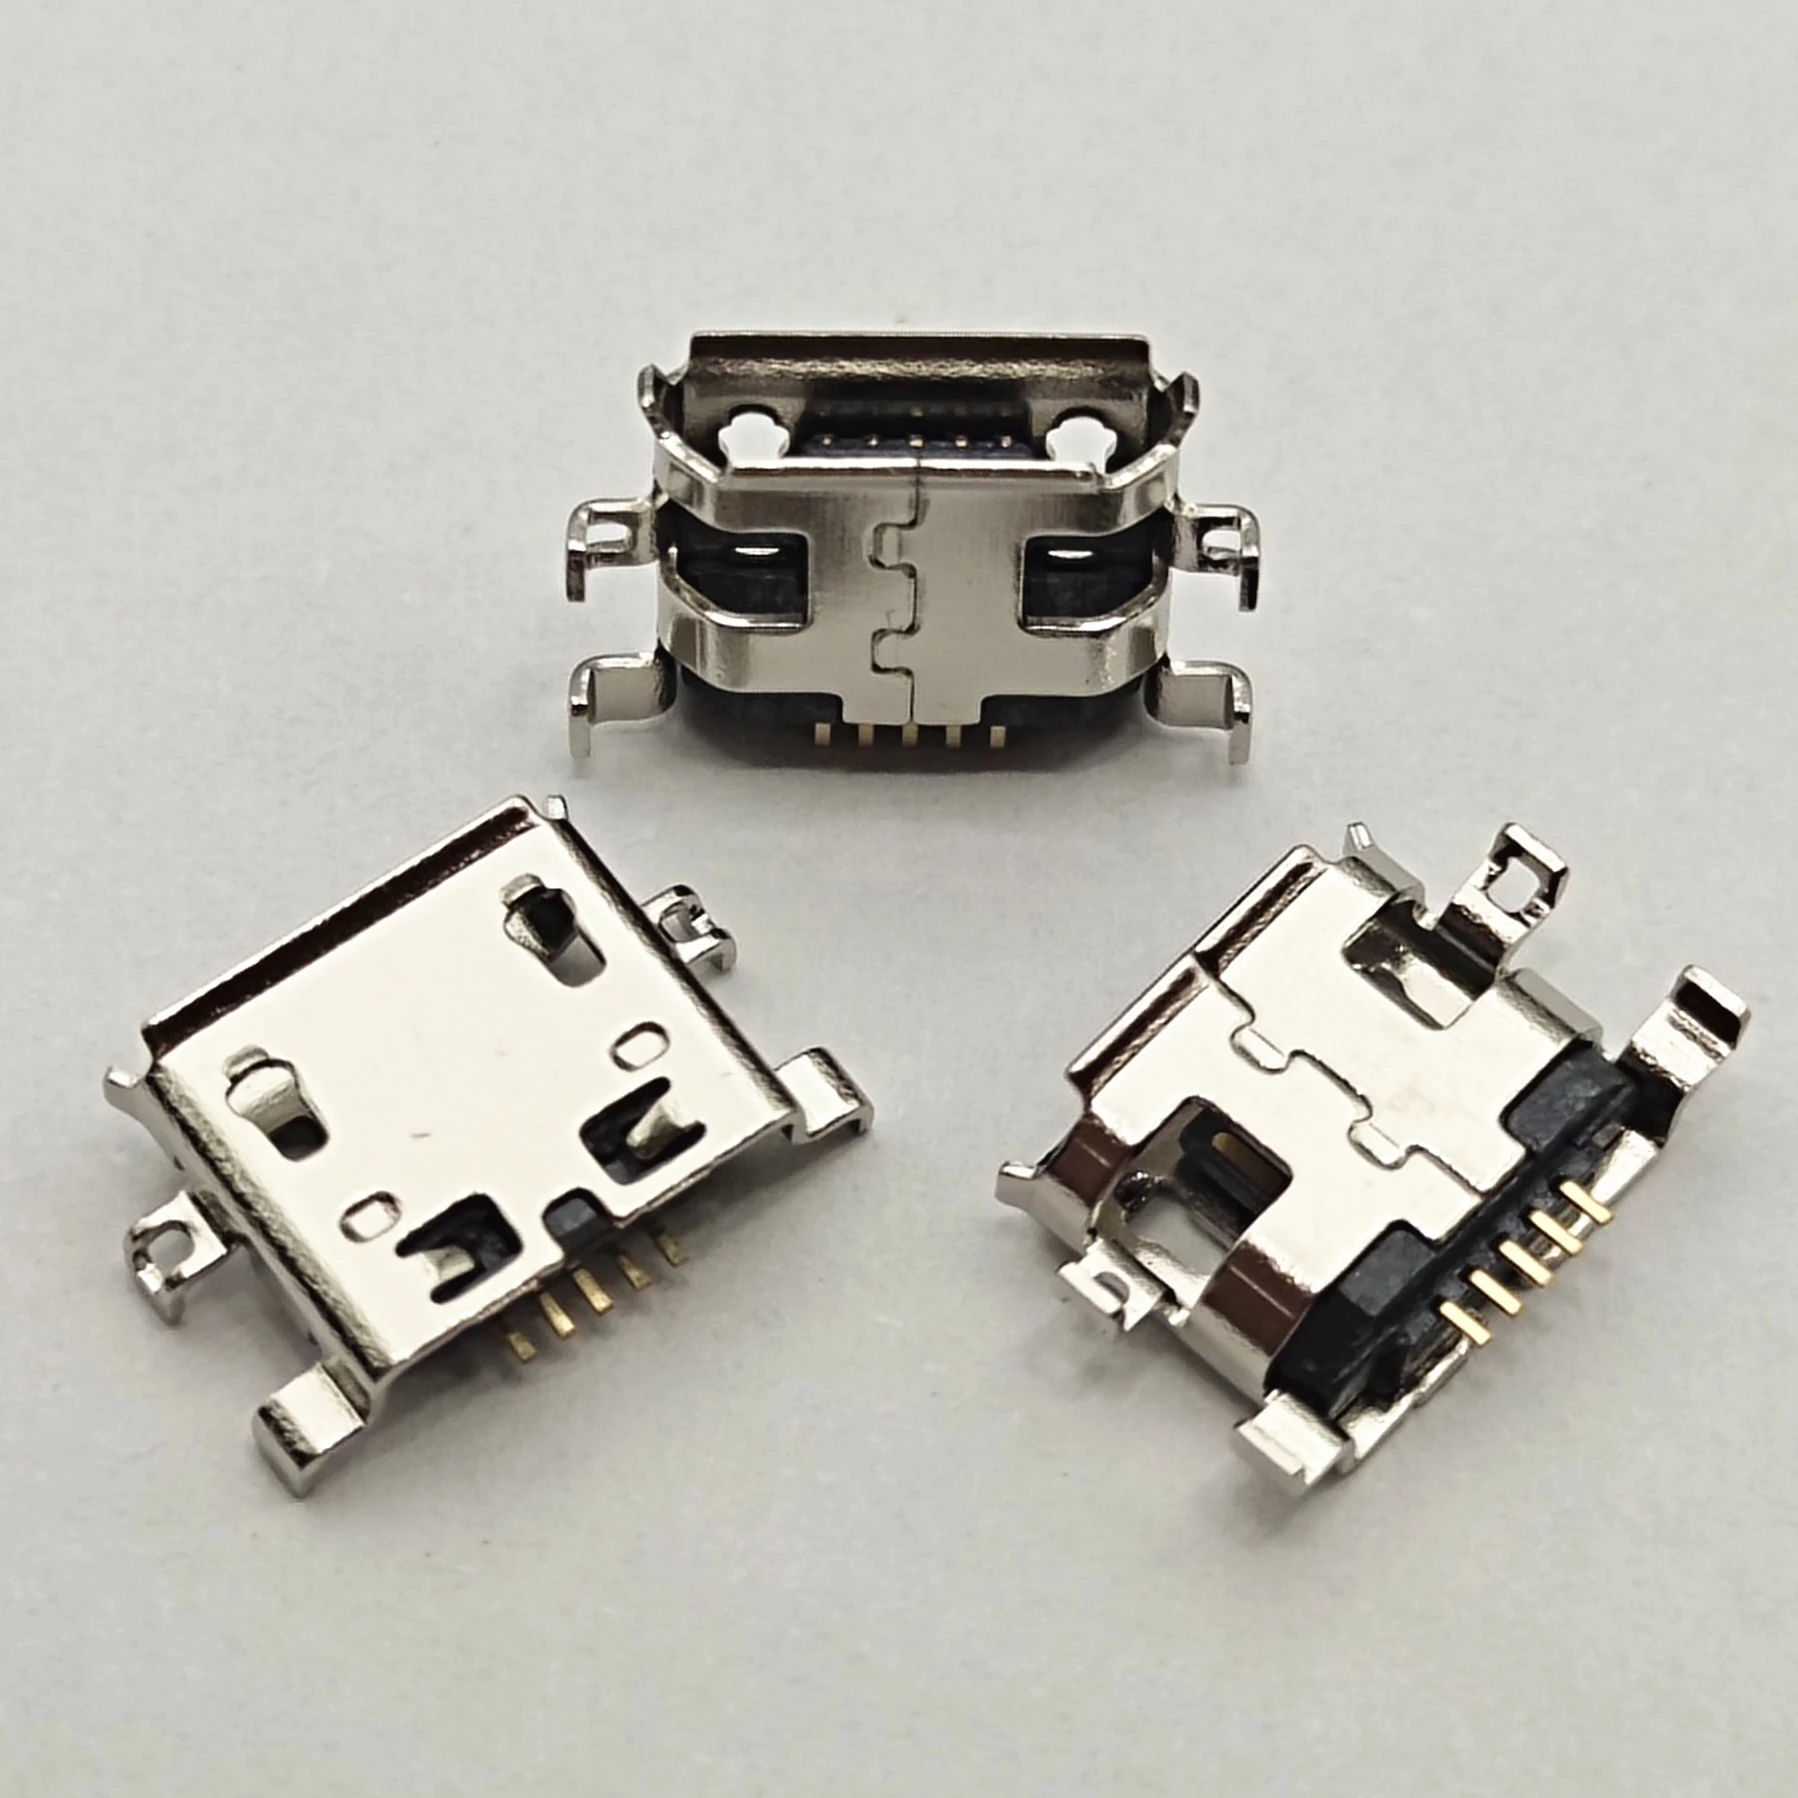 10-100pcs Micro USB Connector 5pin Mid Mount 0.8mm charger Charging Upturned Port Dock socket For ZTE N880S U880 V880 C8650 P700 100pcs micro usb female socket 5pin smd short needle copper shell data port charging port mk5p mini usb connector free shipping